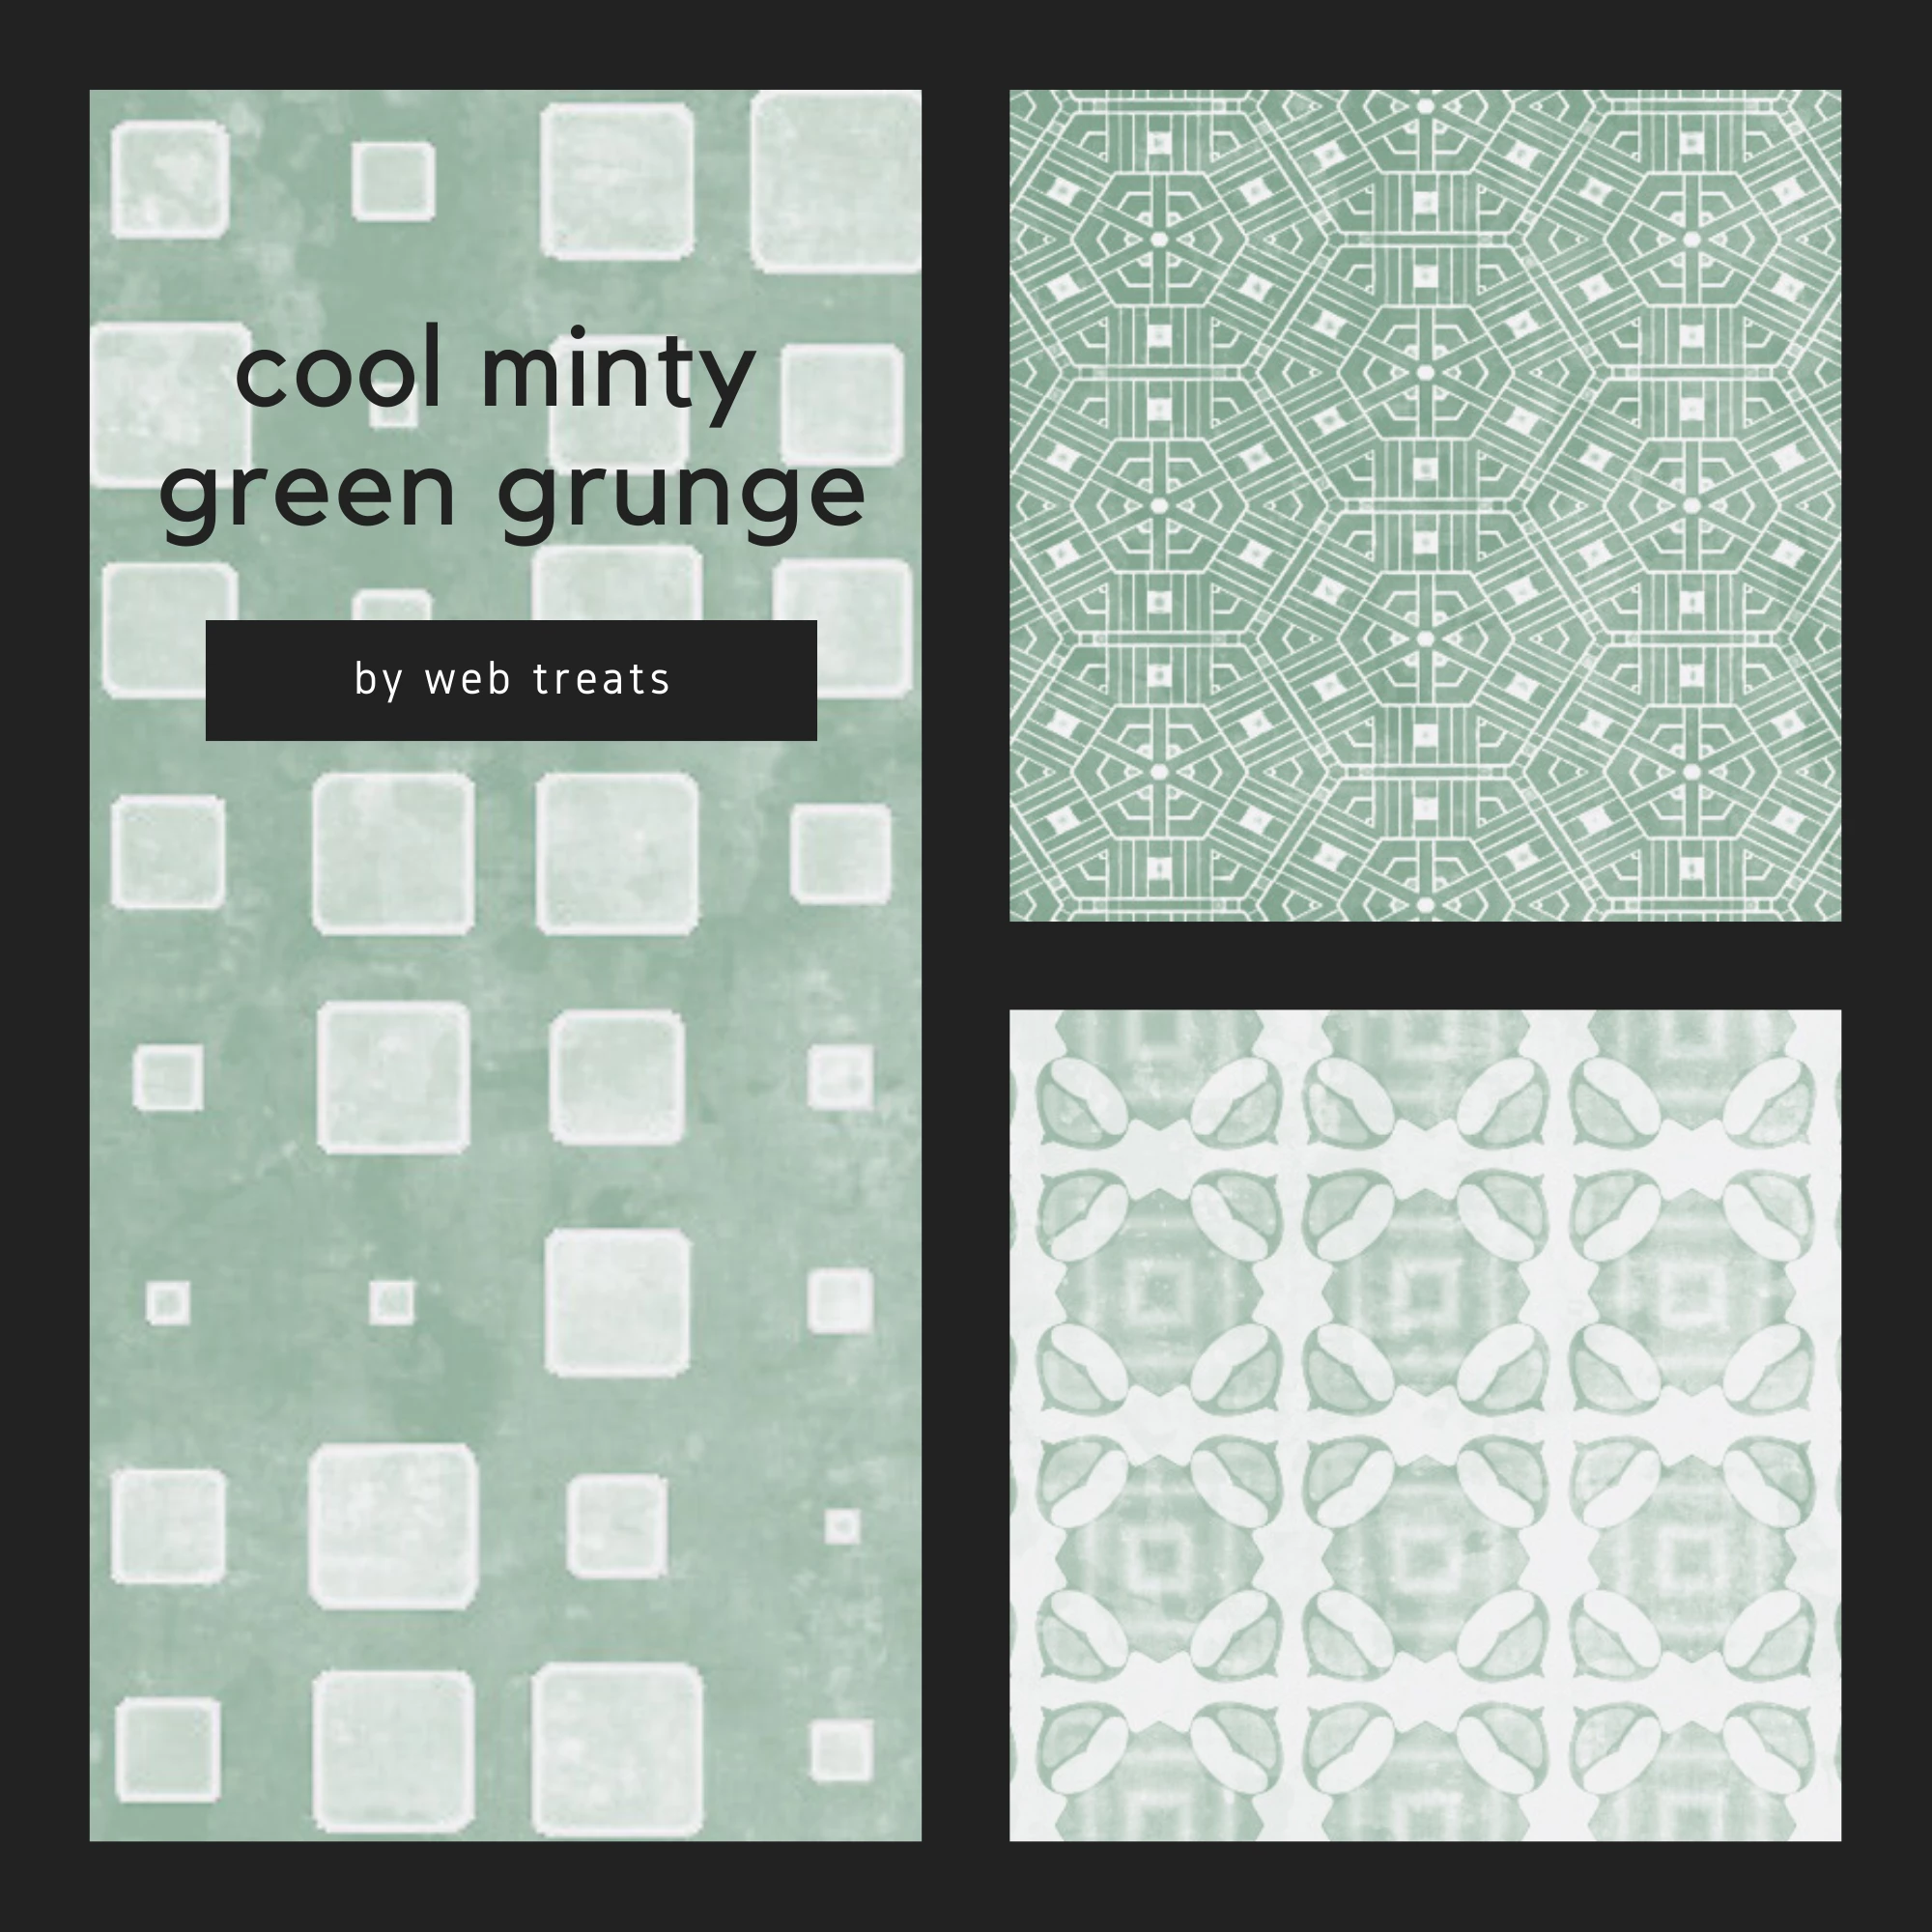 cool minty green grunge textures